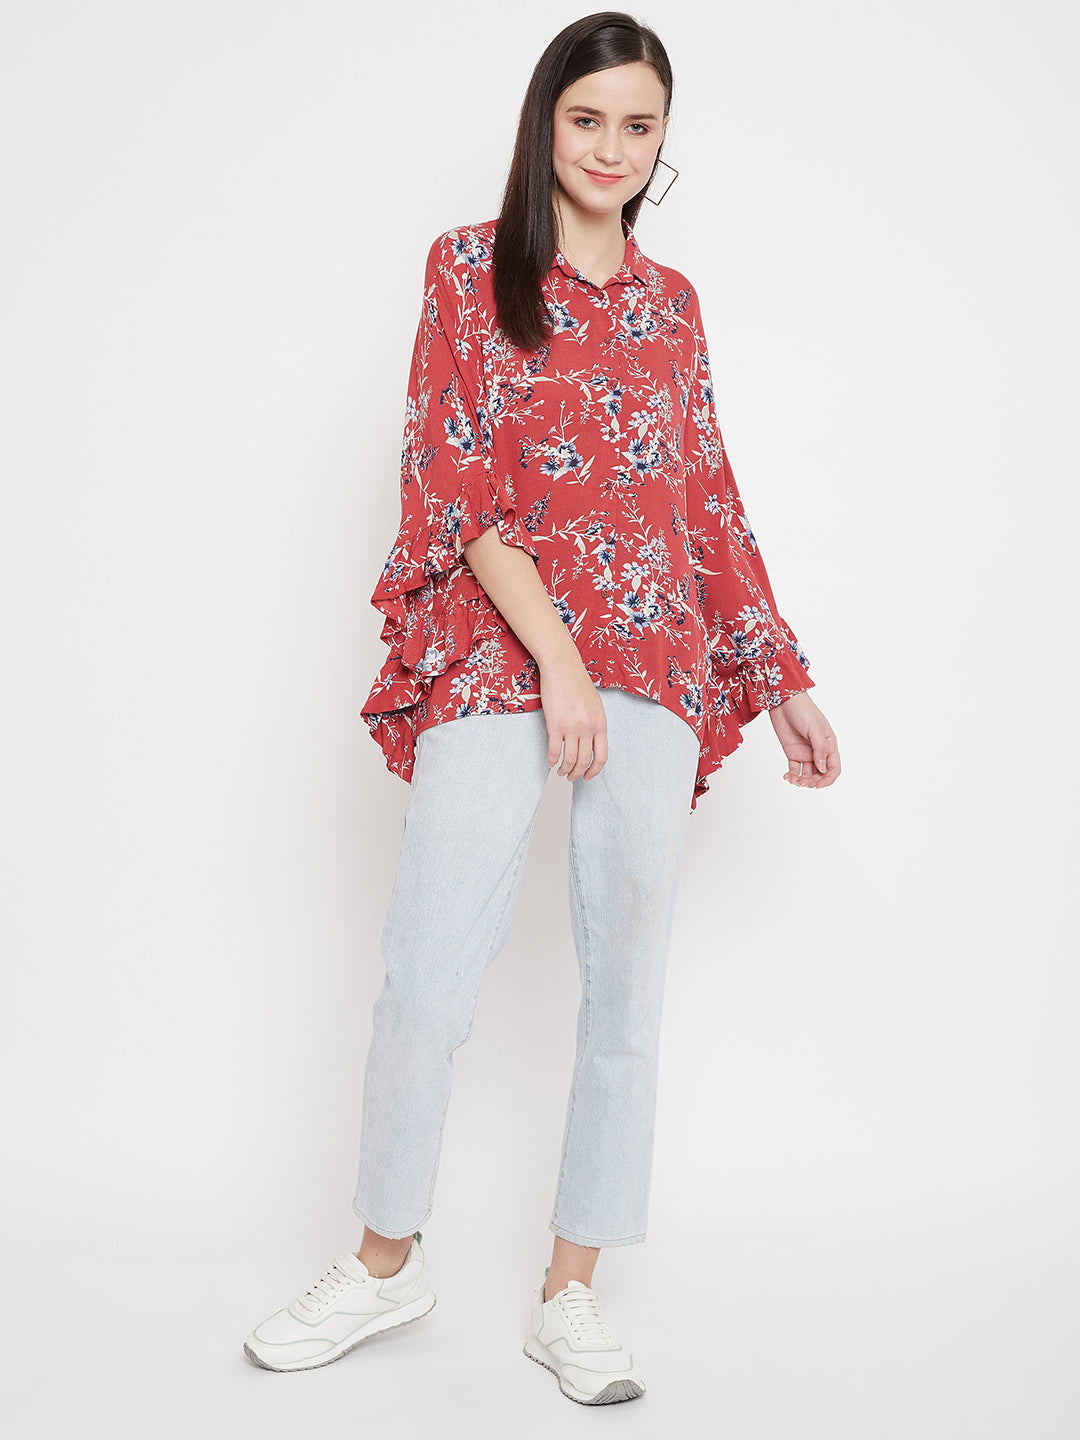 Red Poncho Party Top - Women Tops